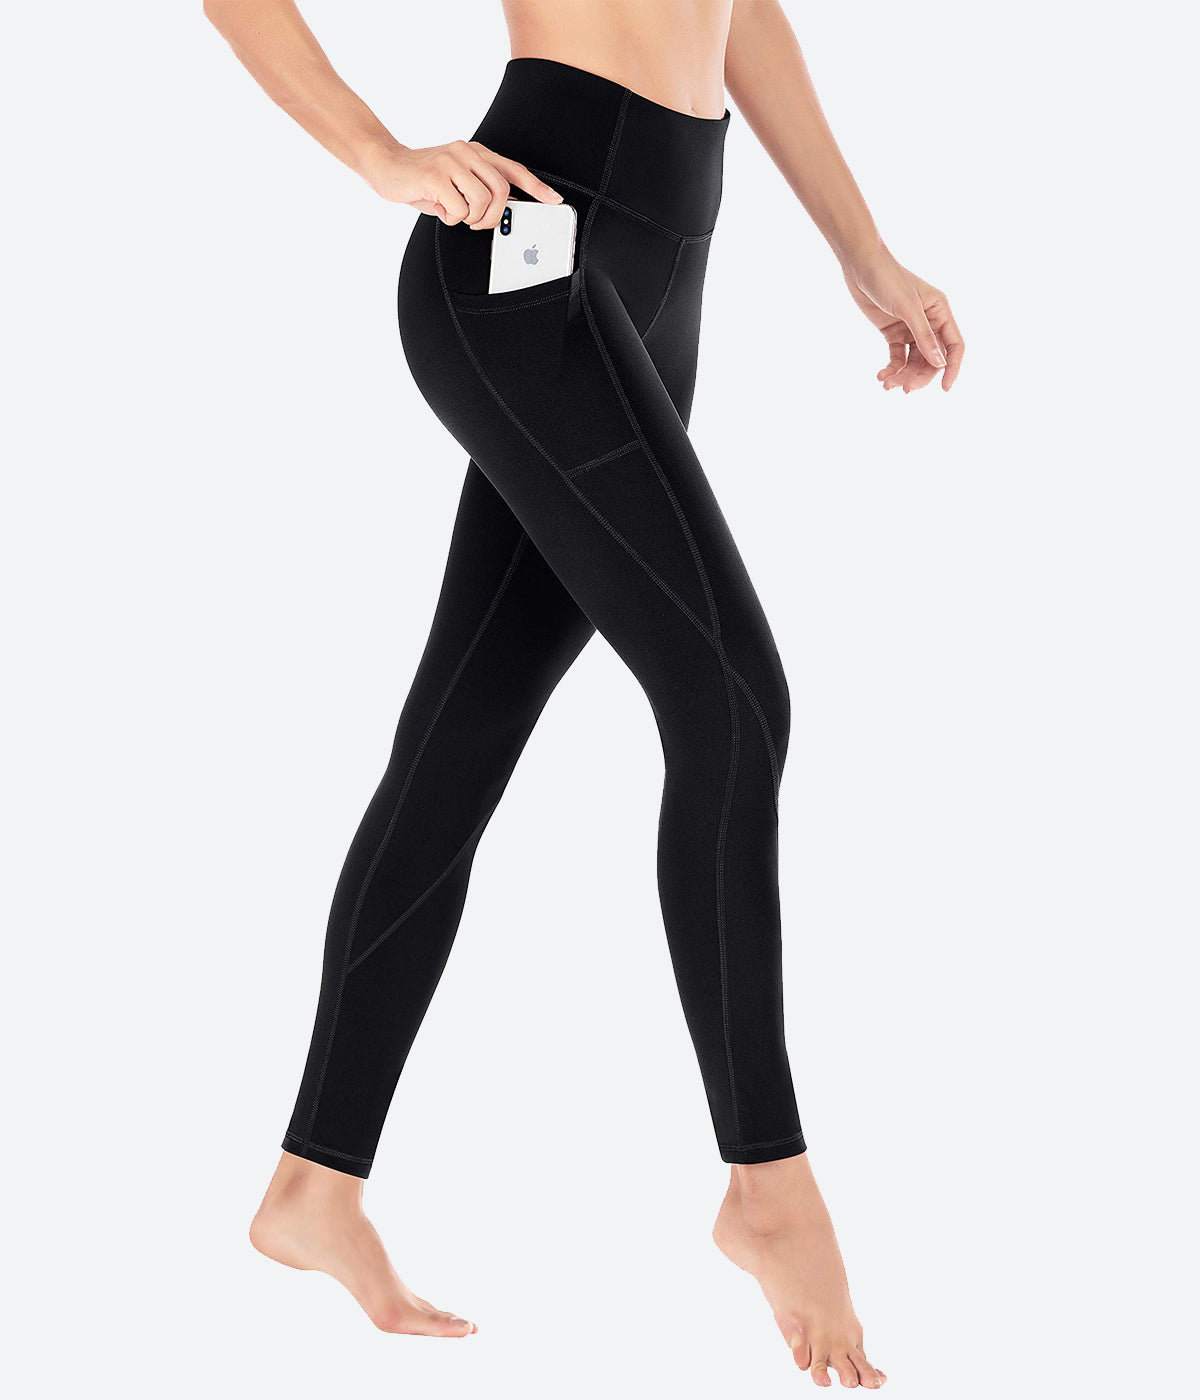 POWERASIA High Waisted Yoga Pants with Pockets for Women, Tummy